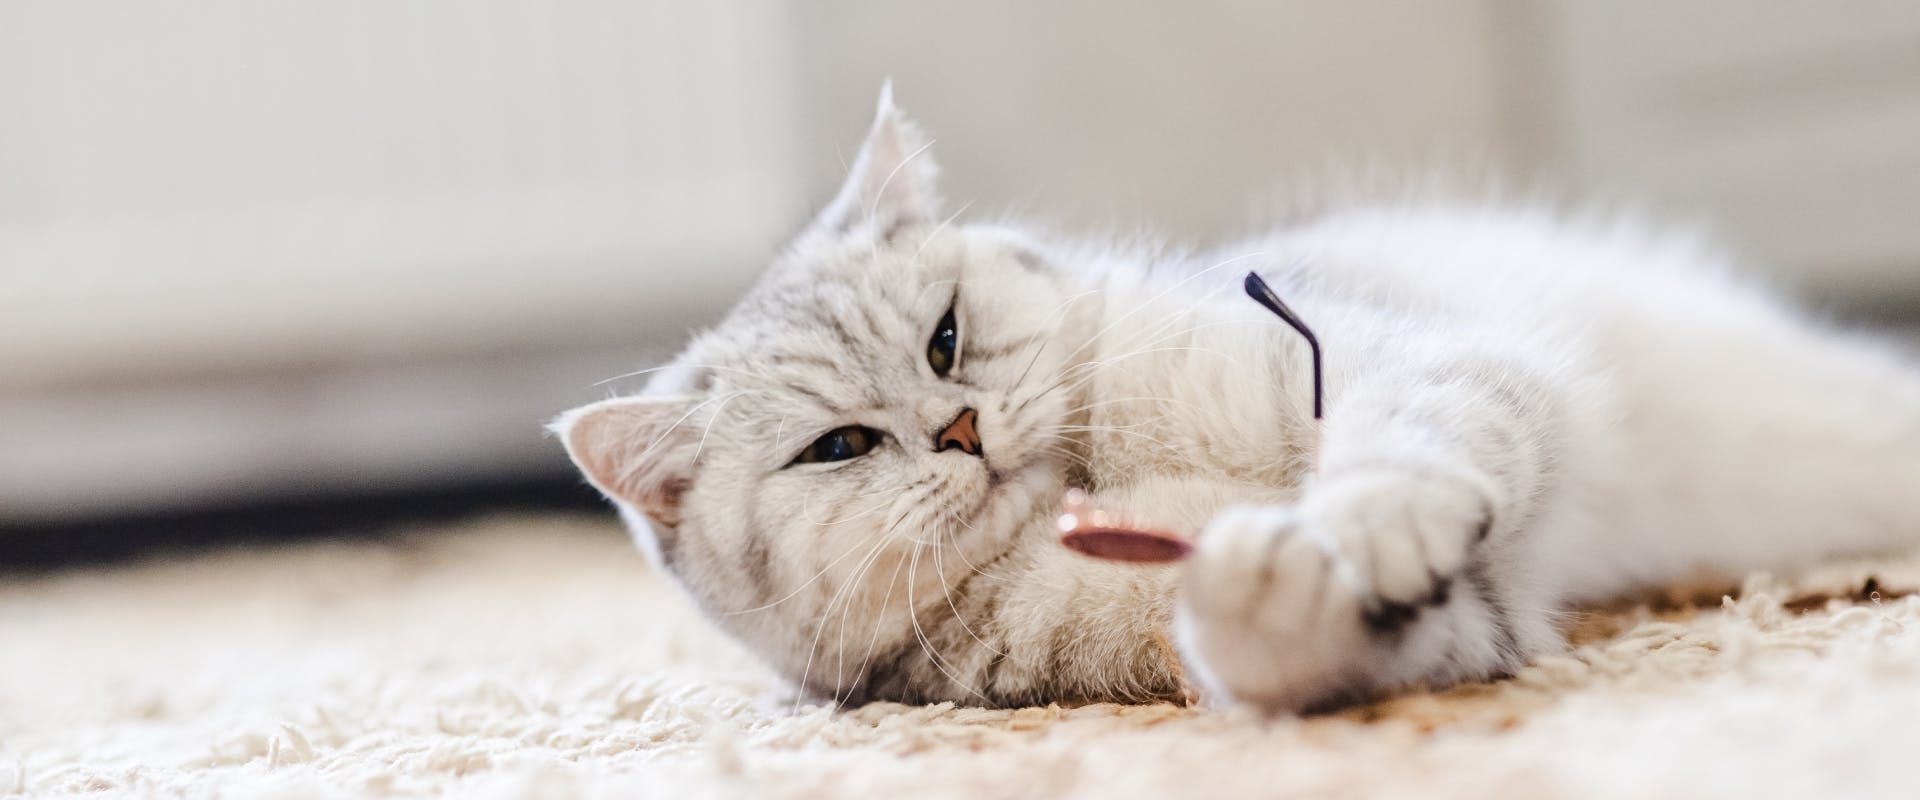 white cat lying on a carpet playing with a pair of sunglasses